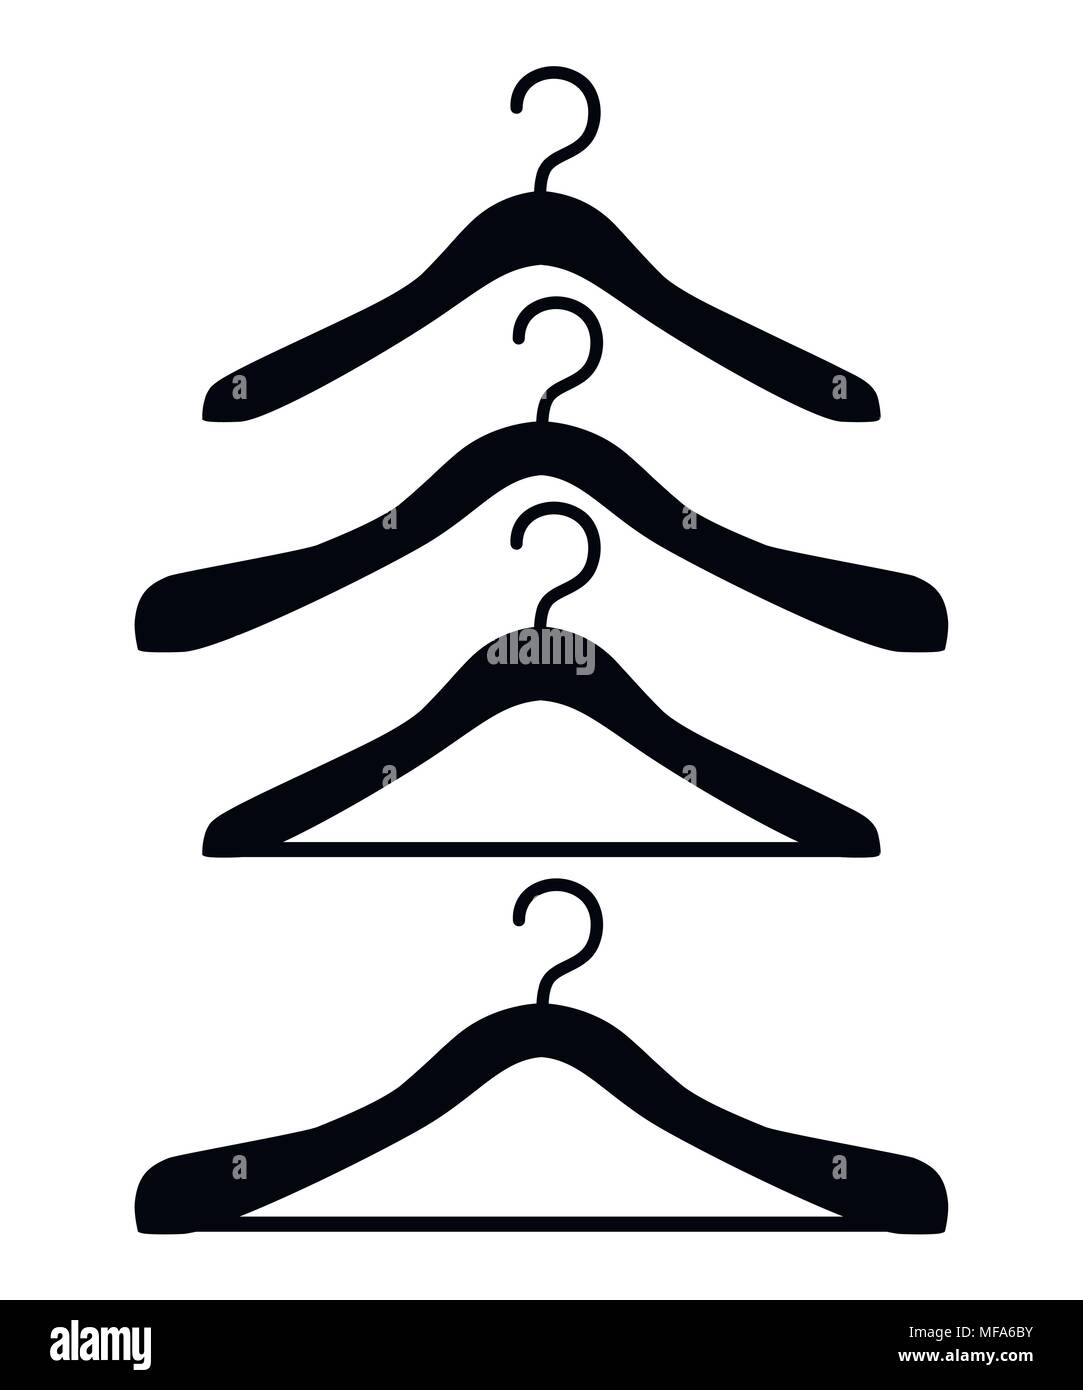 Black silhouette. Set of wooden hanger. Four different hangers. Flat style design. Vector illustration isolated on white background. Web site page and Stock Vector